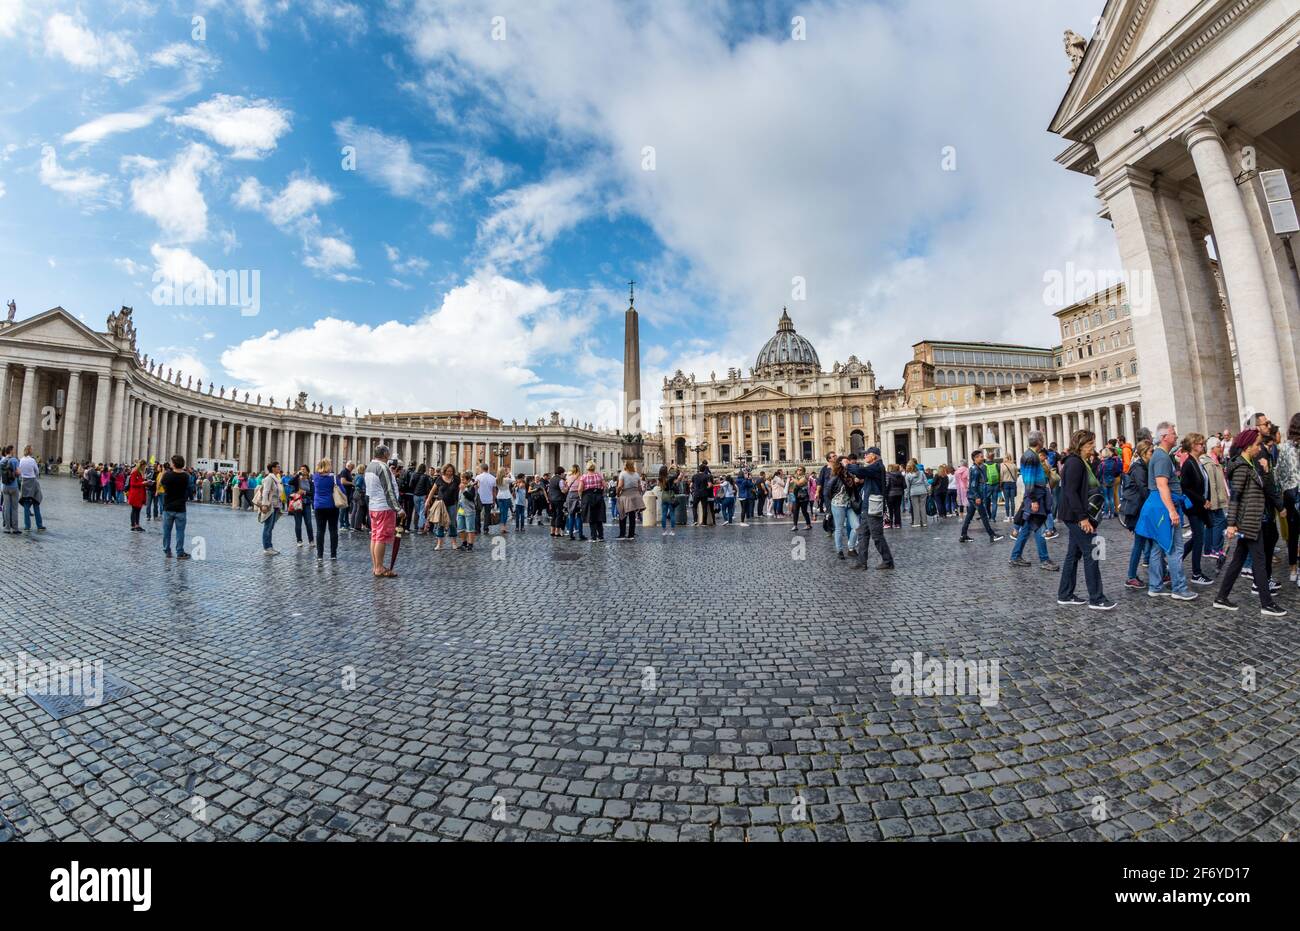 Vatican - Oct 06, 2018: Tourists bustle around St. Peter's Square in front of St. Peter’s Cathedral Stock Photo